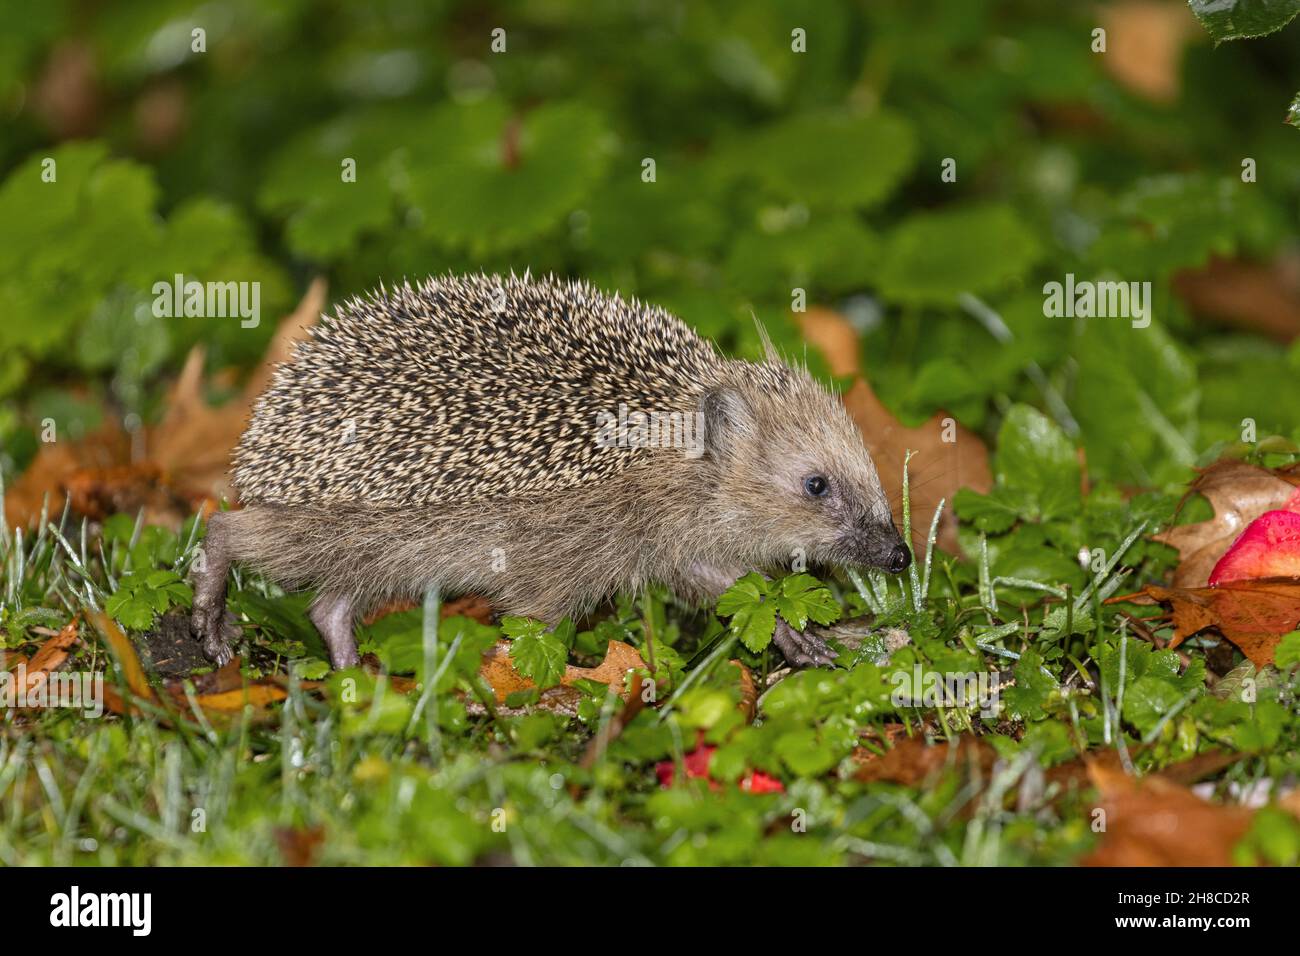 Western hedgehog, European hedgehog (Erinaceus europaeus), walking through a wet with dew meadow with fallen leaves in late autumn, Germany, Bavaria Stock Photo